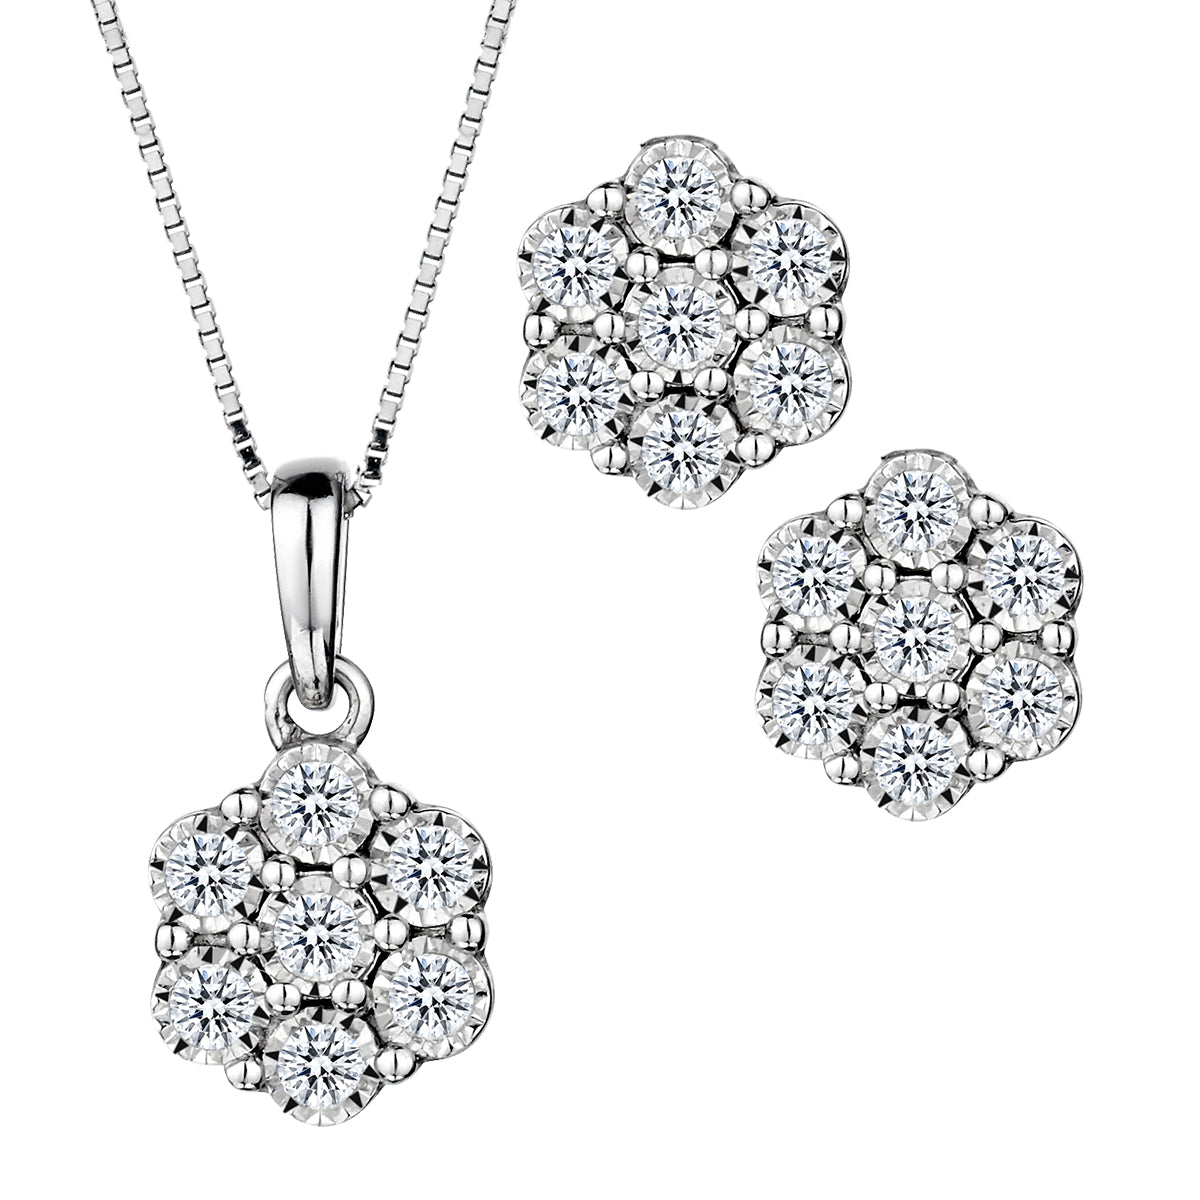 .50 Carat Total Diamond Weight "Flower" Miracle Earrings and Pendant, 14kt White Gold Set.......................NOW